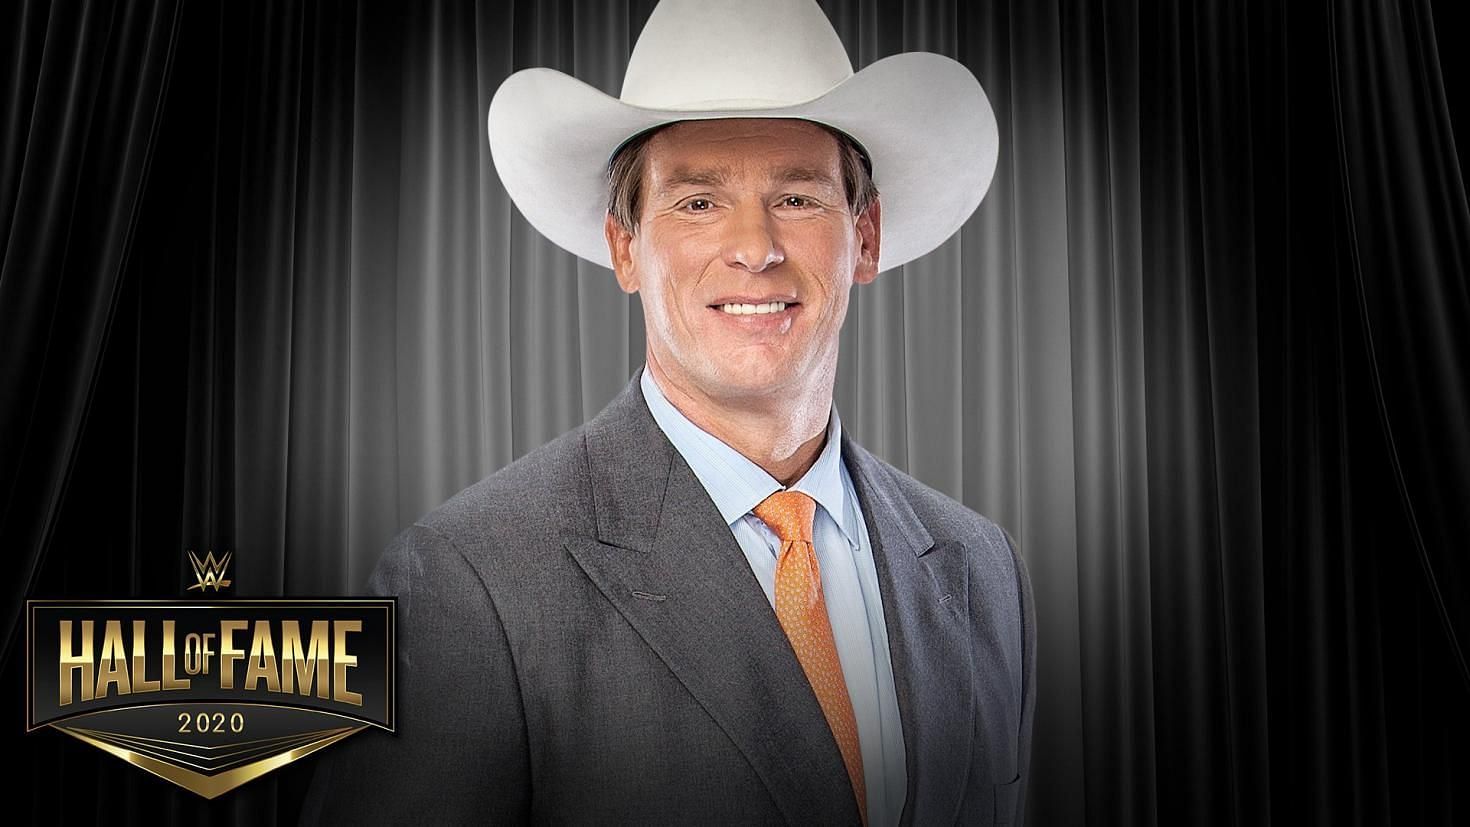 JBL earned his HOF credentials in part to his role as a rich, arrogant heel in WWE.